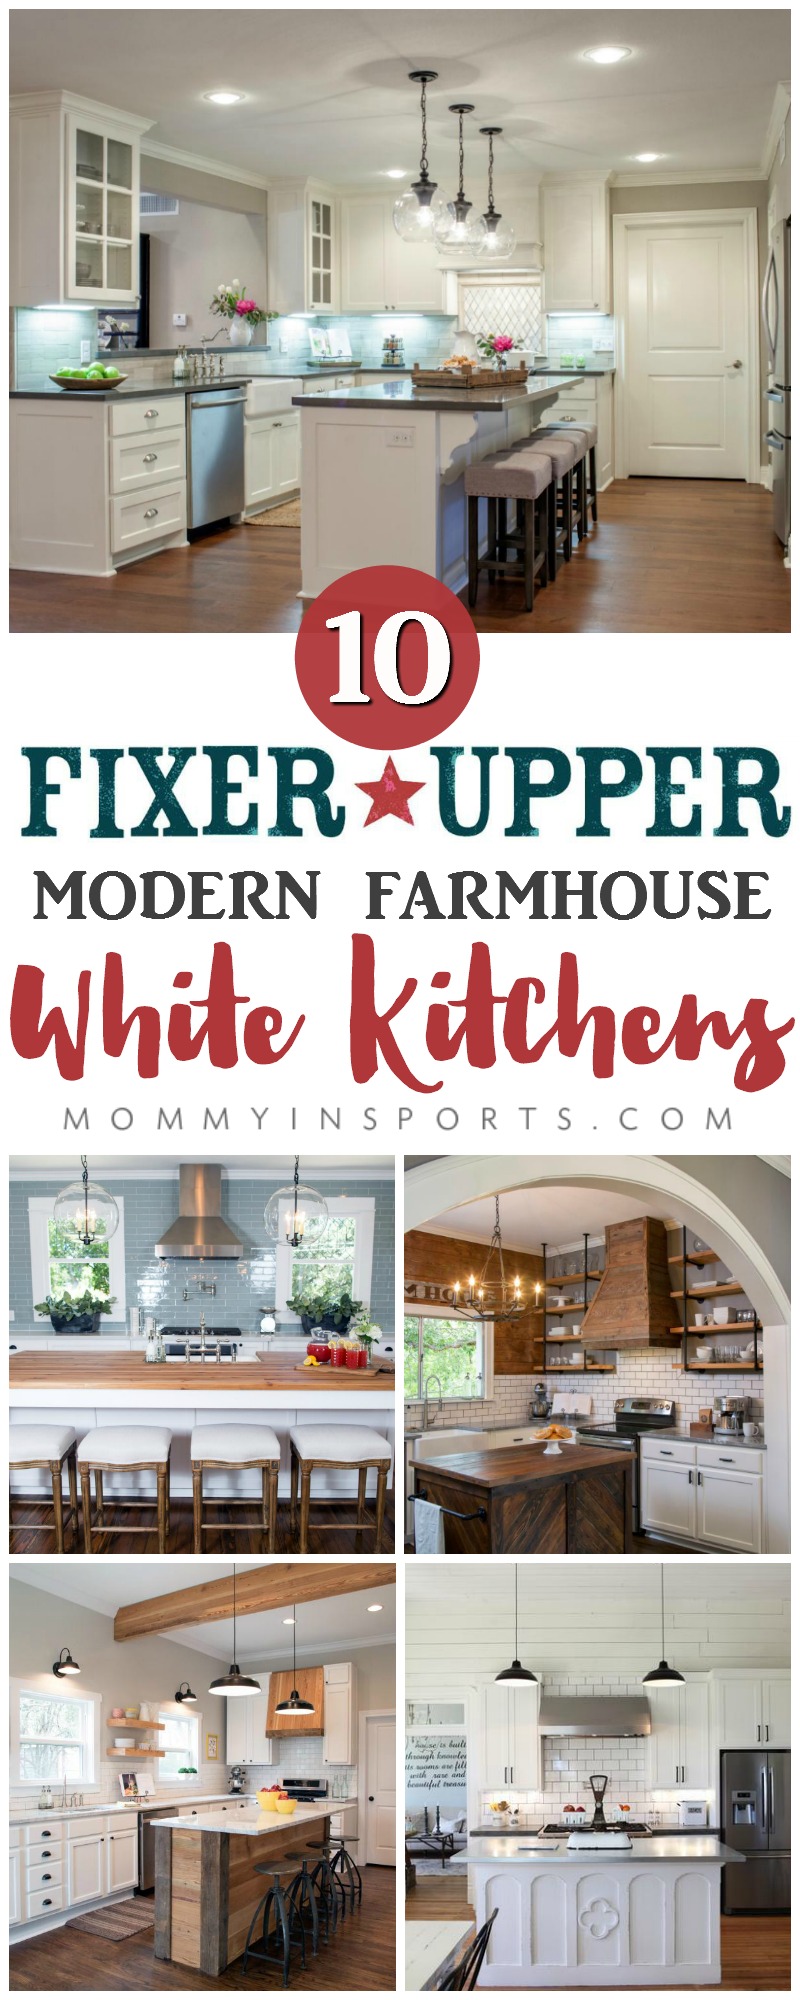 Re-designing a new kitchen and need some inspiration? Check out these 10 perfect Fixer Upper Modern Farmhouse White Kitchens! You too can have the kitchen of your dreams!